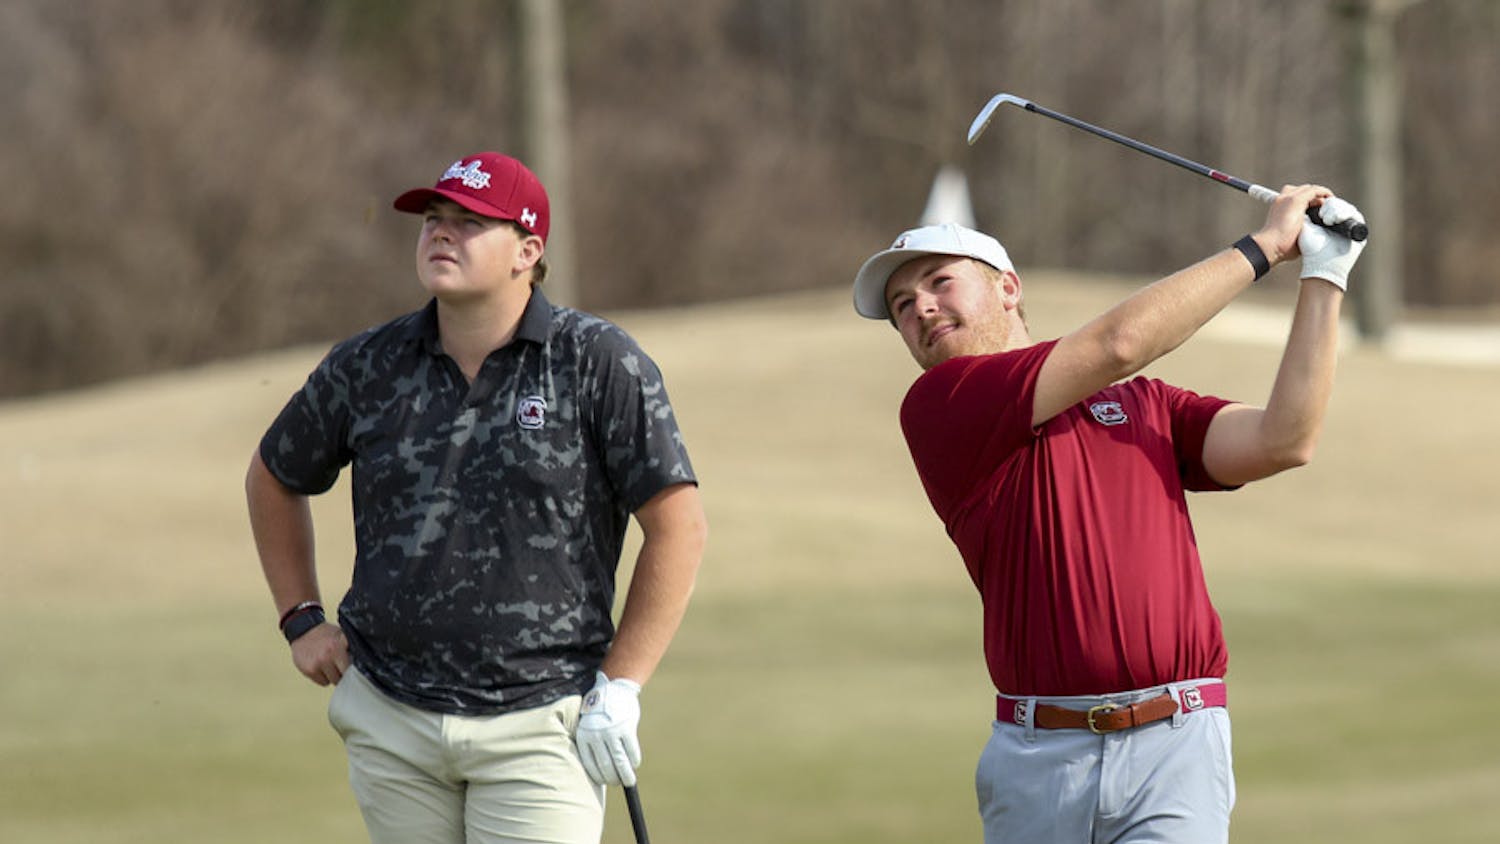 Fifth-year golfer Evans Lewis (on left) and redshirt senior golfer Lansdon Robbins (on right) watch the ball after Robbins wedges it off the green during practice on Feb. 8, 2023. Robbins transferred to South Carolina from UNC Wilmington this year after placing second on the team in low strokes and being named a member of the Colonial Athletic Association Conference’s Second Team for back-to-back years in 2021 and 2022.&nbsp;